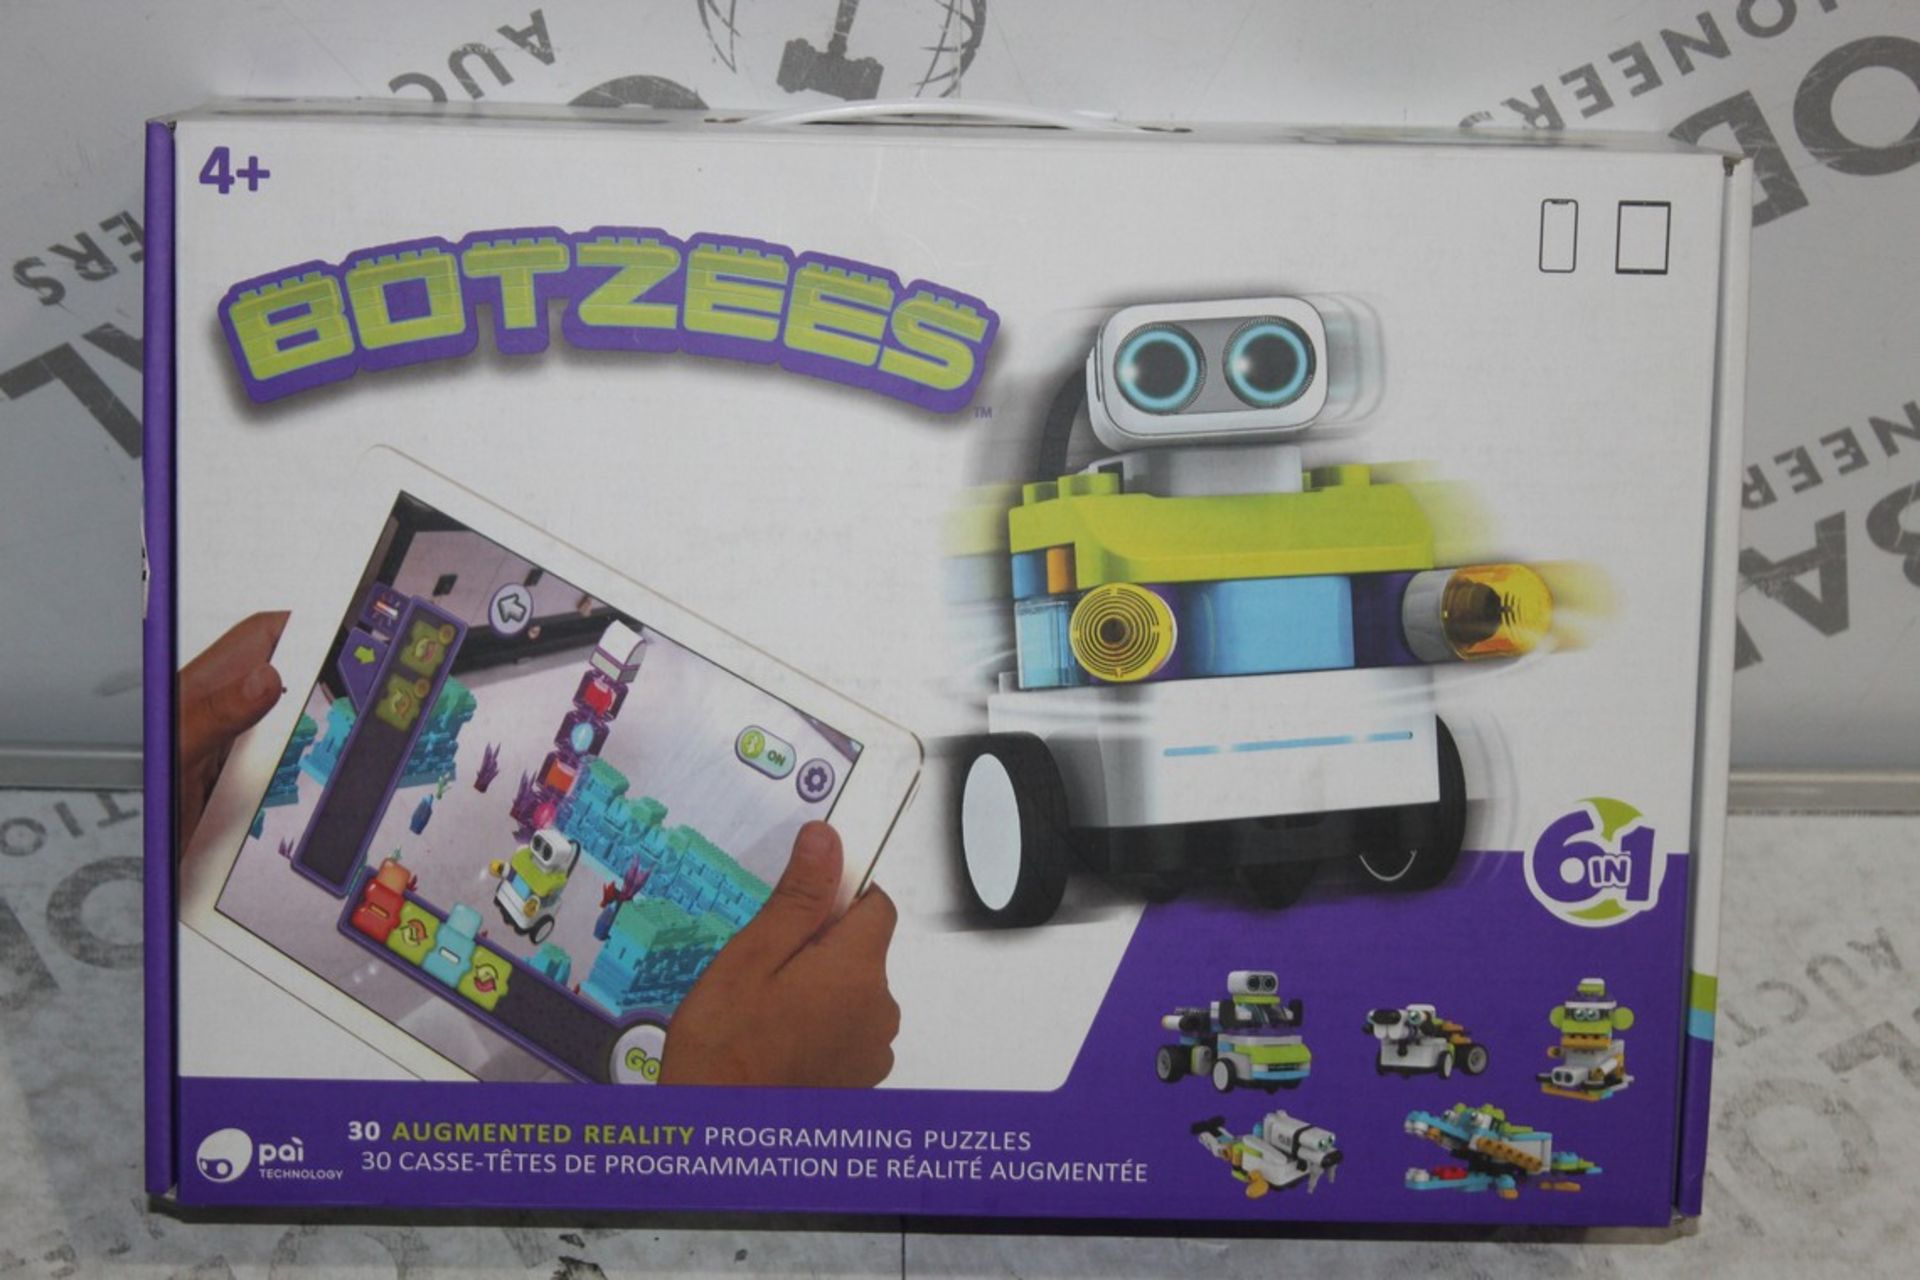 Boxed Botzees Augmented Reality Programmable Puzzles Educational Games RRP £105